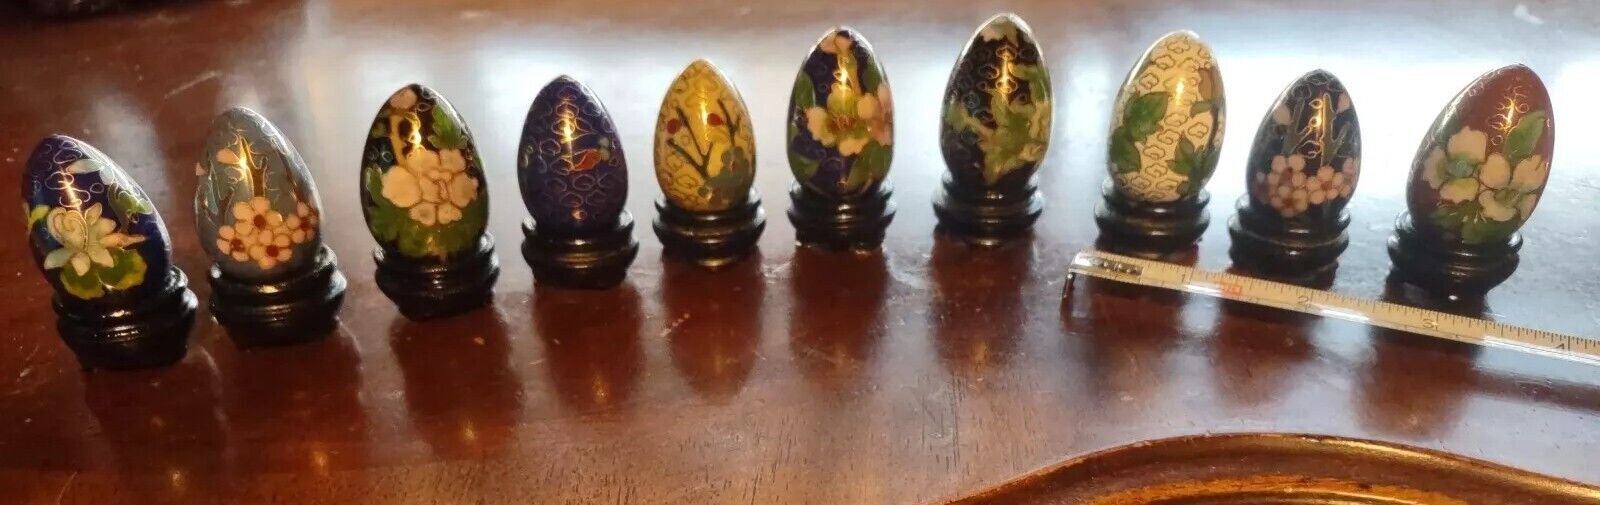 Set of 10 VINTAGE Handcrafted Mini Cloisonné Eggs w/Wooden Stands - BEAUTIFUL